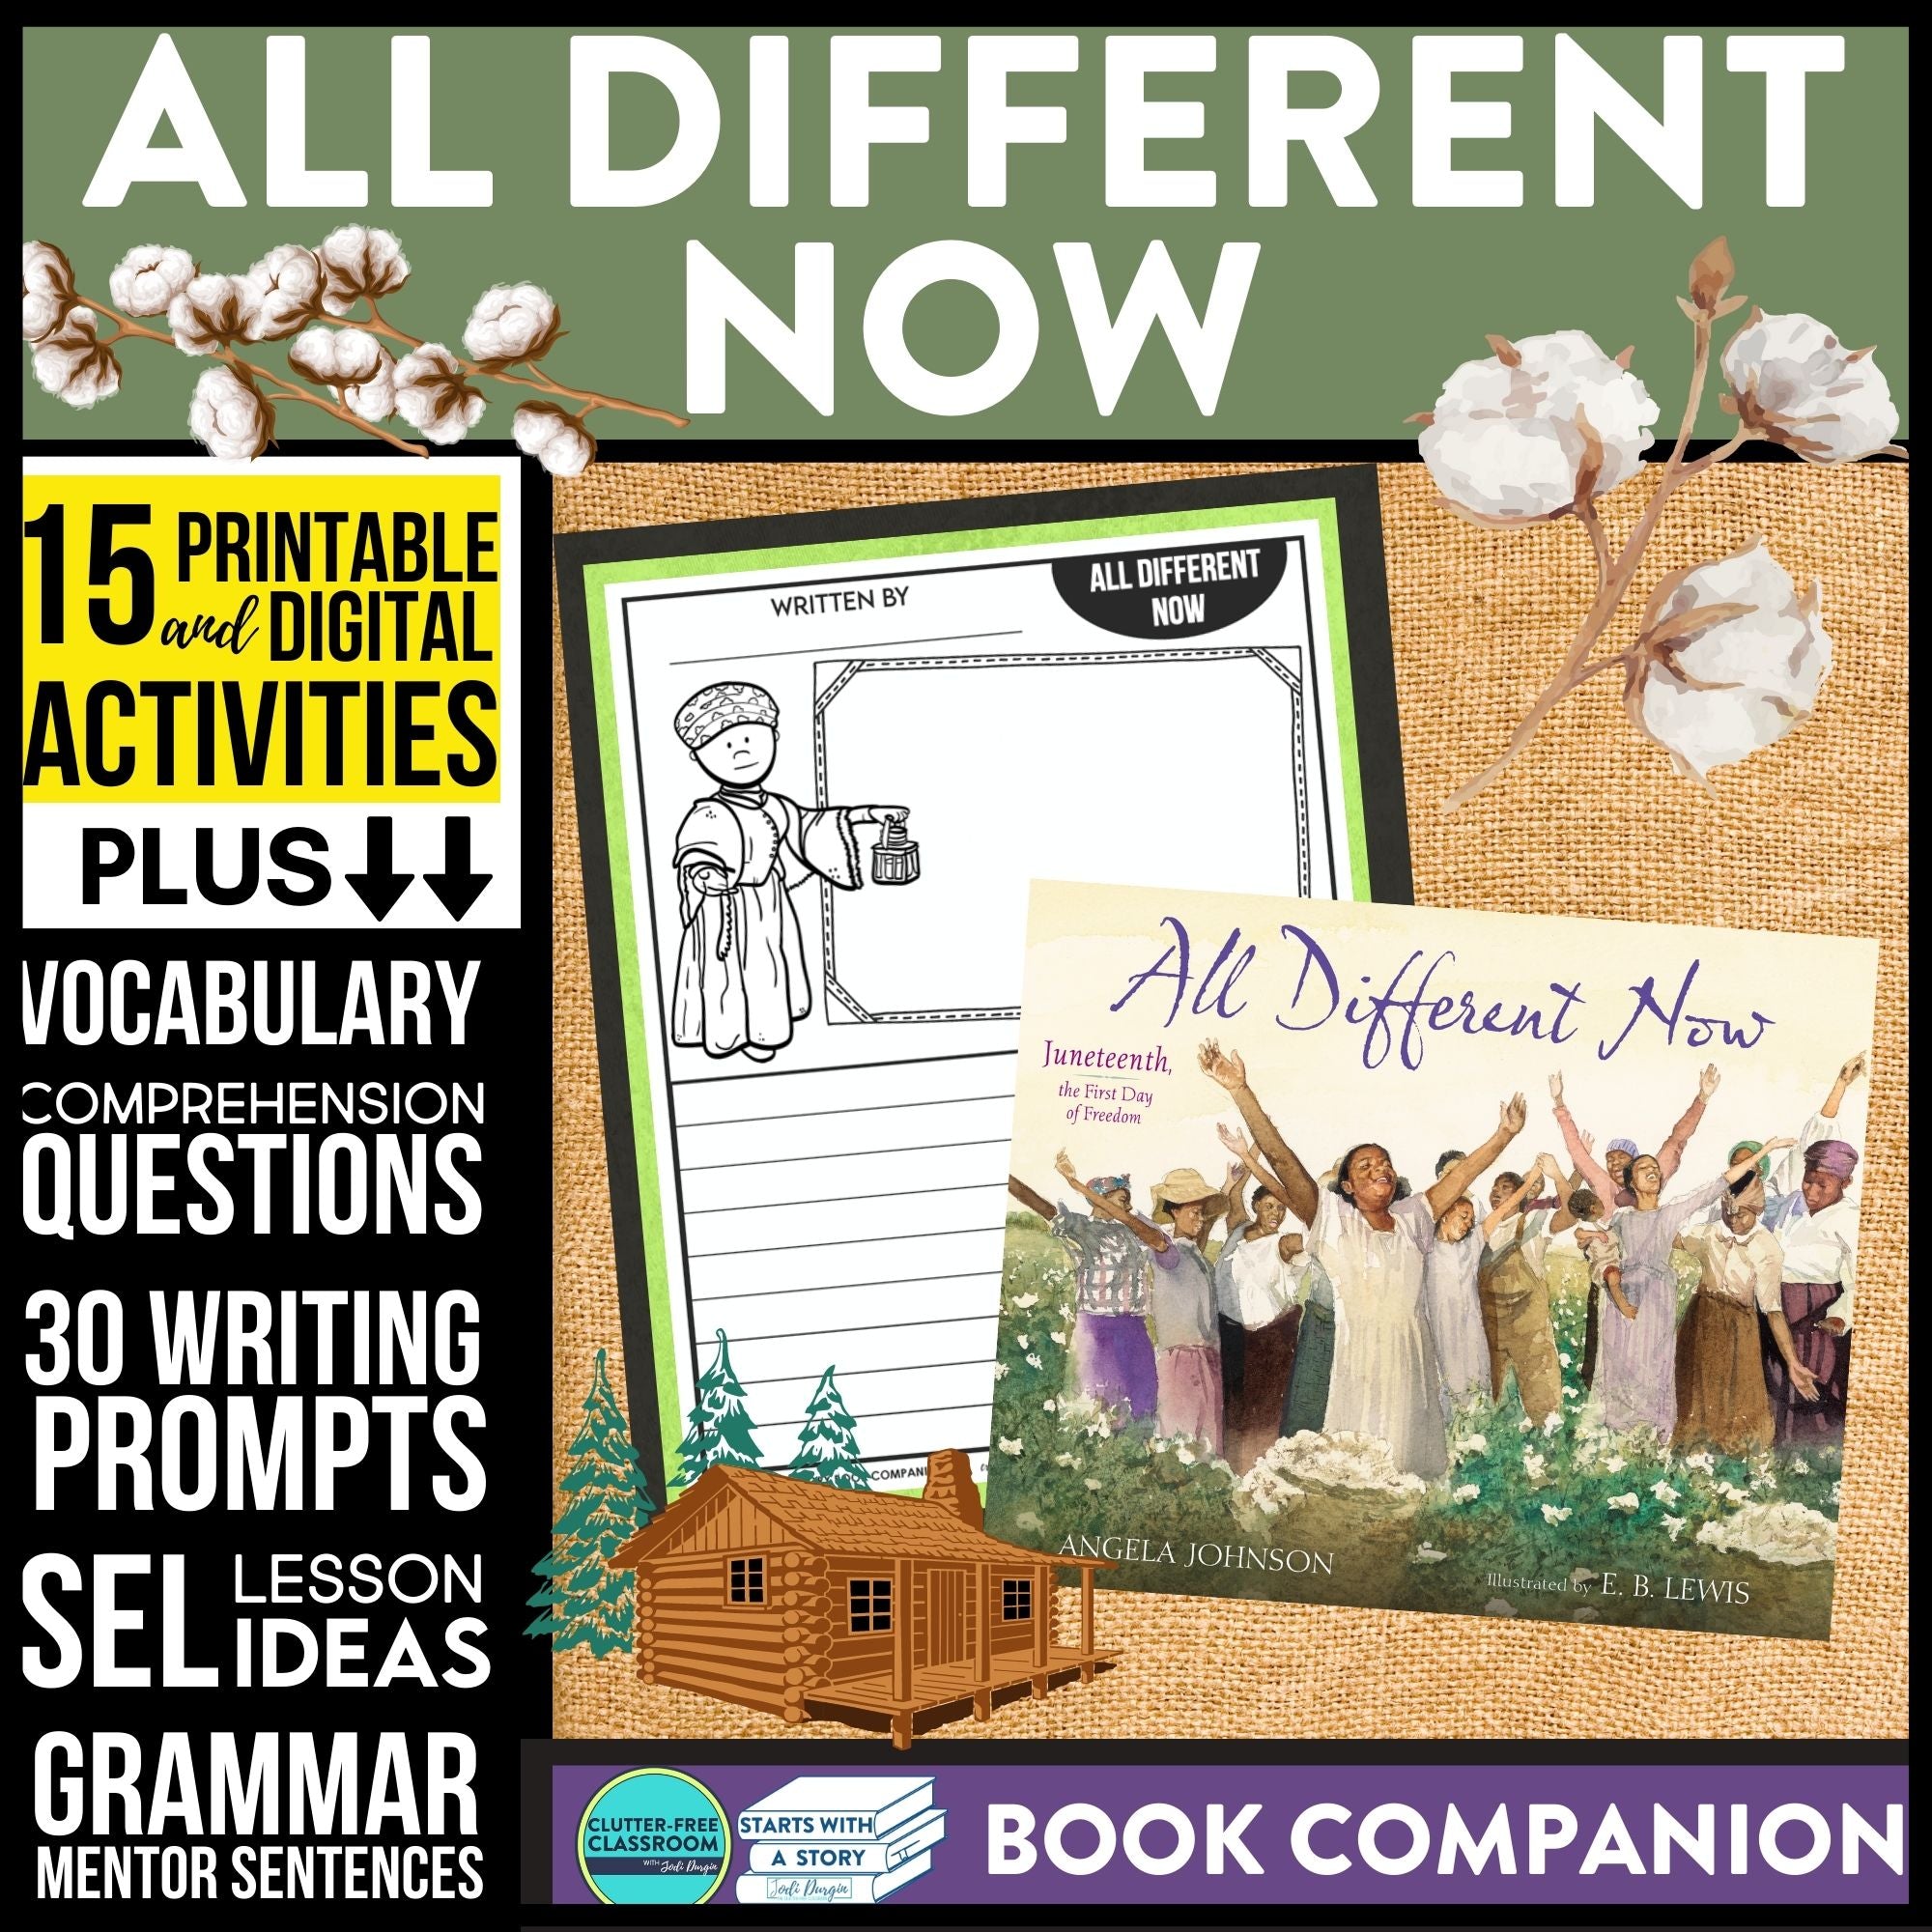 ALL DIFFERENT NOW activities and lesson plan ideas